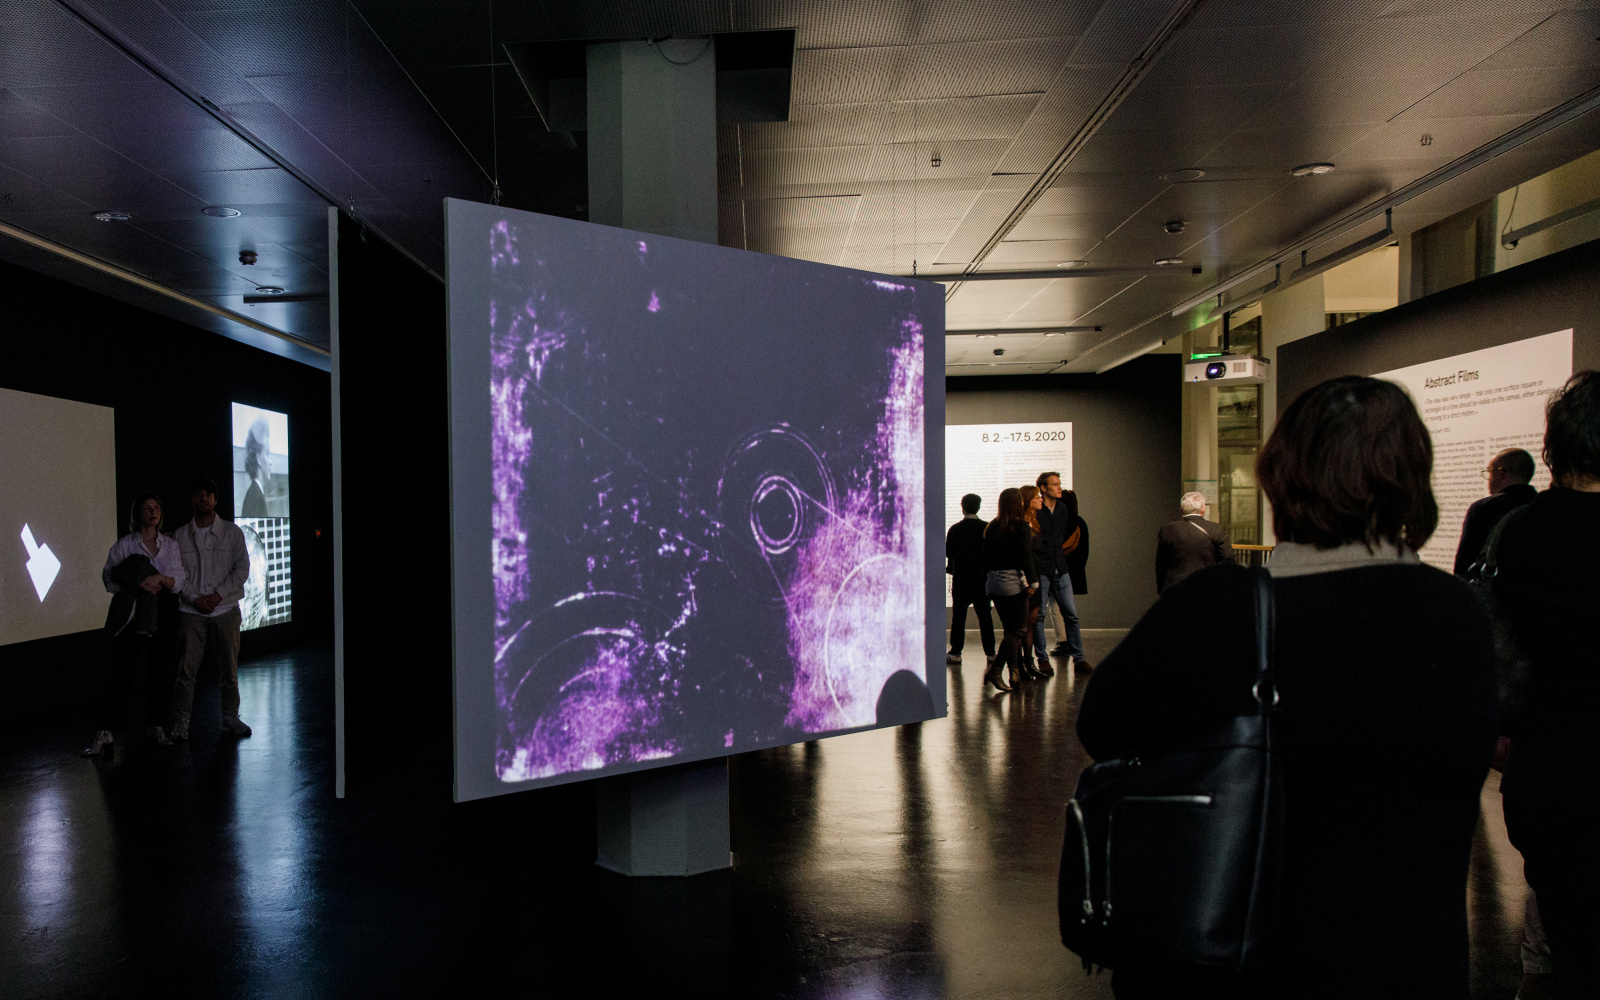 Photo of people in front of a projection screen with an abstract video in purple - an impression of the exhibition »bauhaus.film.expanded« at the ZKM Karlsruhe.